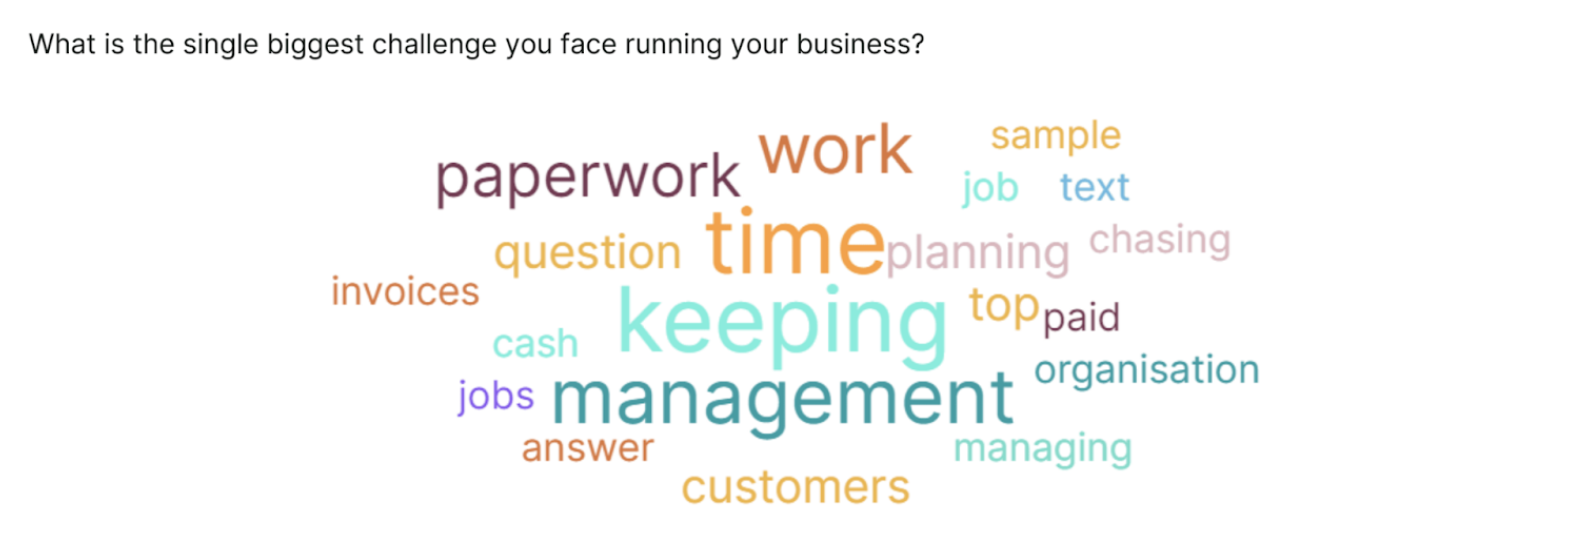 Word cluster of the responses when asked what the biggest challenge facing their business was